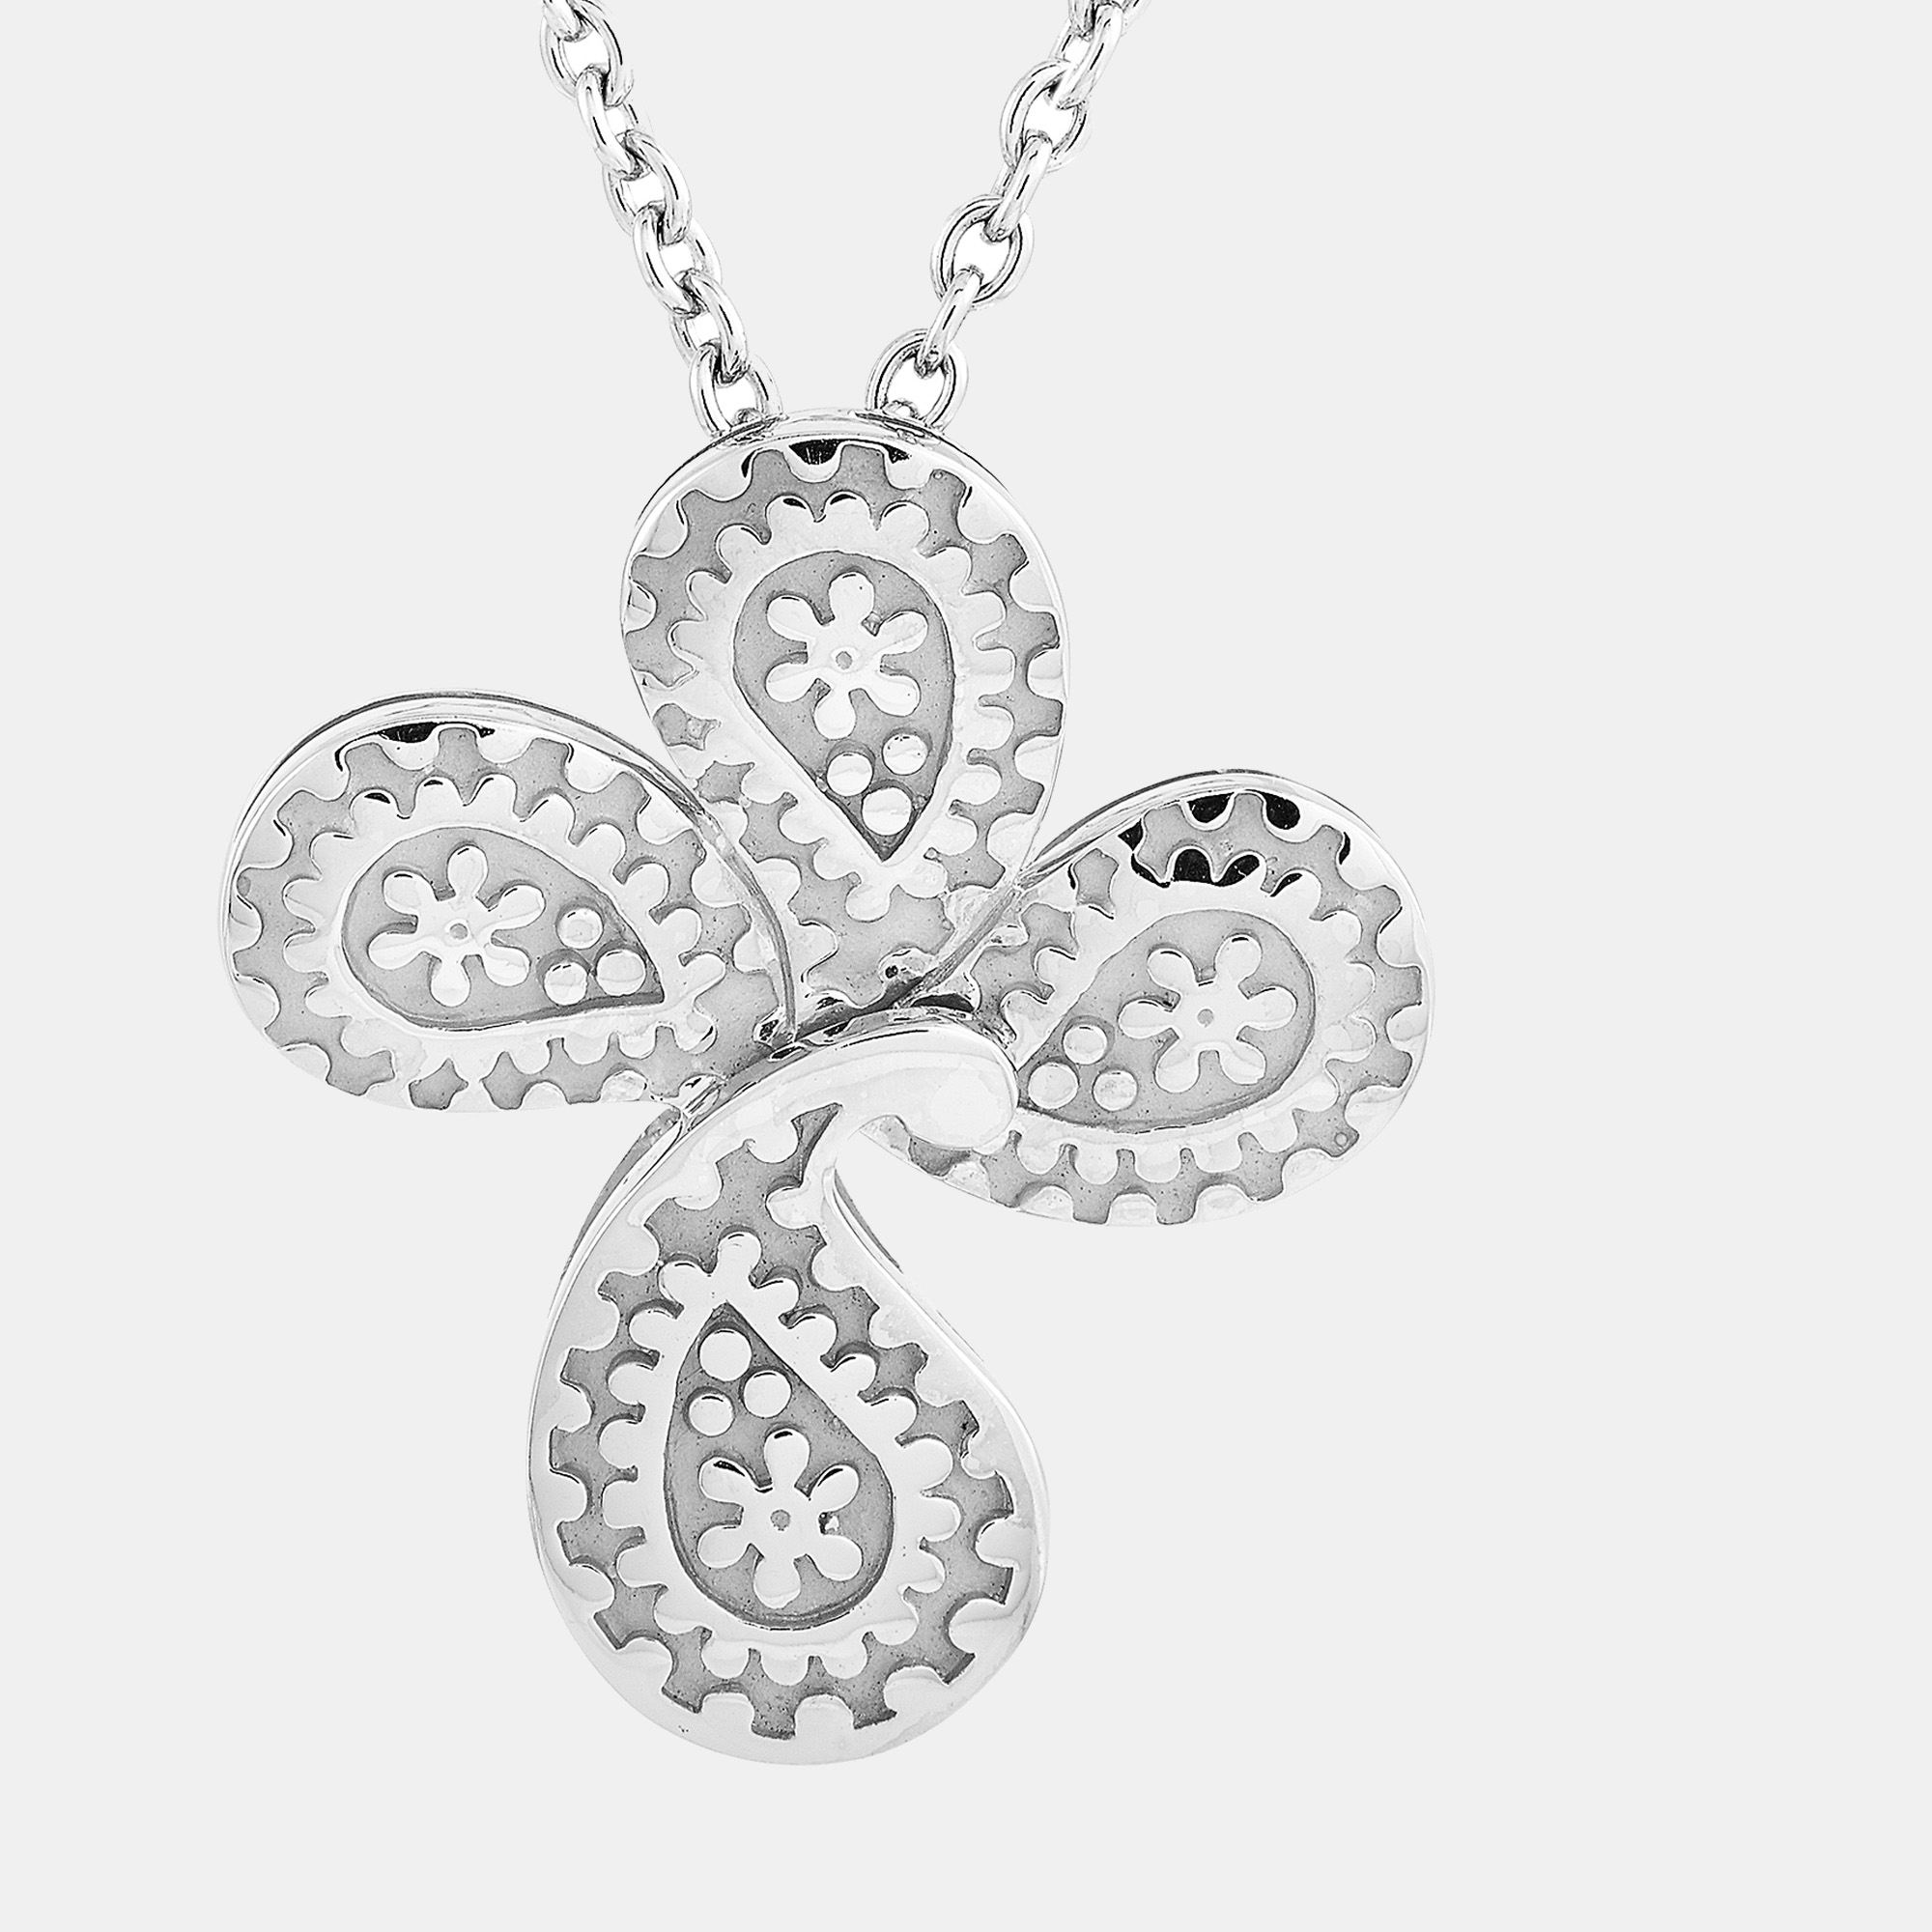 This Carrera y Carrera necklace is crafted from 18K white gold and weighs 12 grams. The necklace is presented with an 18 chain onto which a 1 by 0.88 cross pendant is attached.